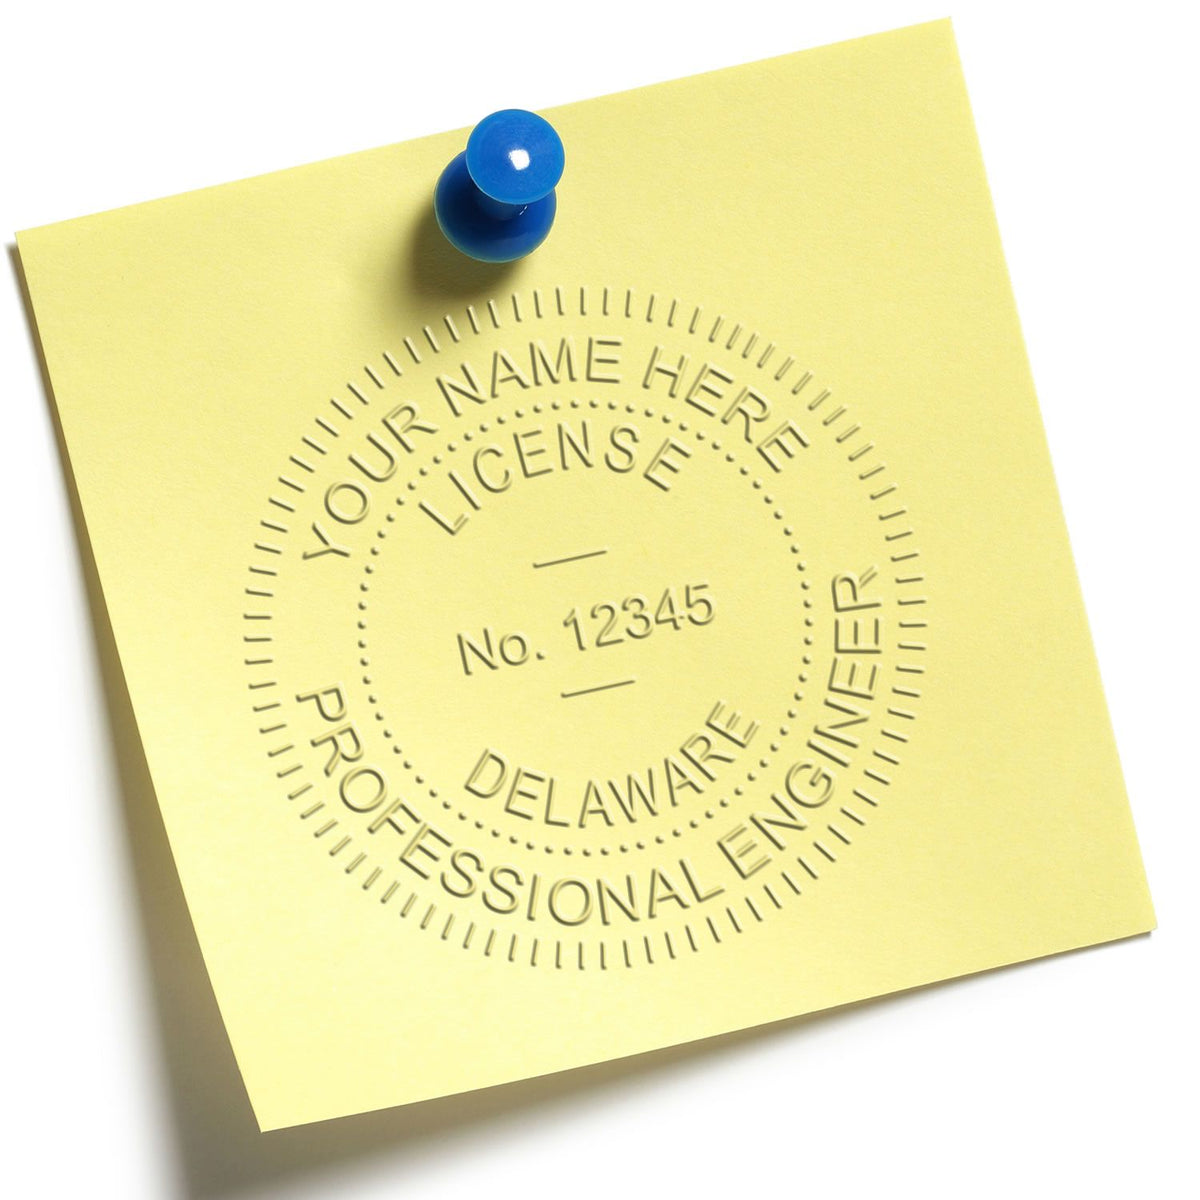 The Handheld Delaware Professional Engineer Embosser stamp impression comes to life with a crisp, detailed photo on paper - showcasing true professional quality.